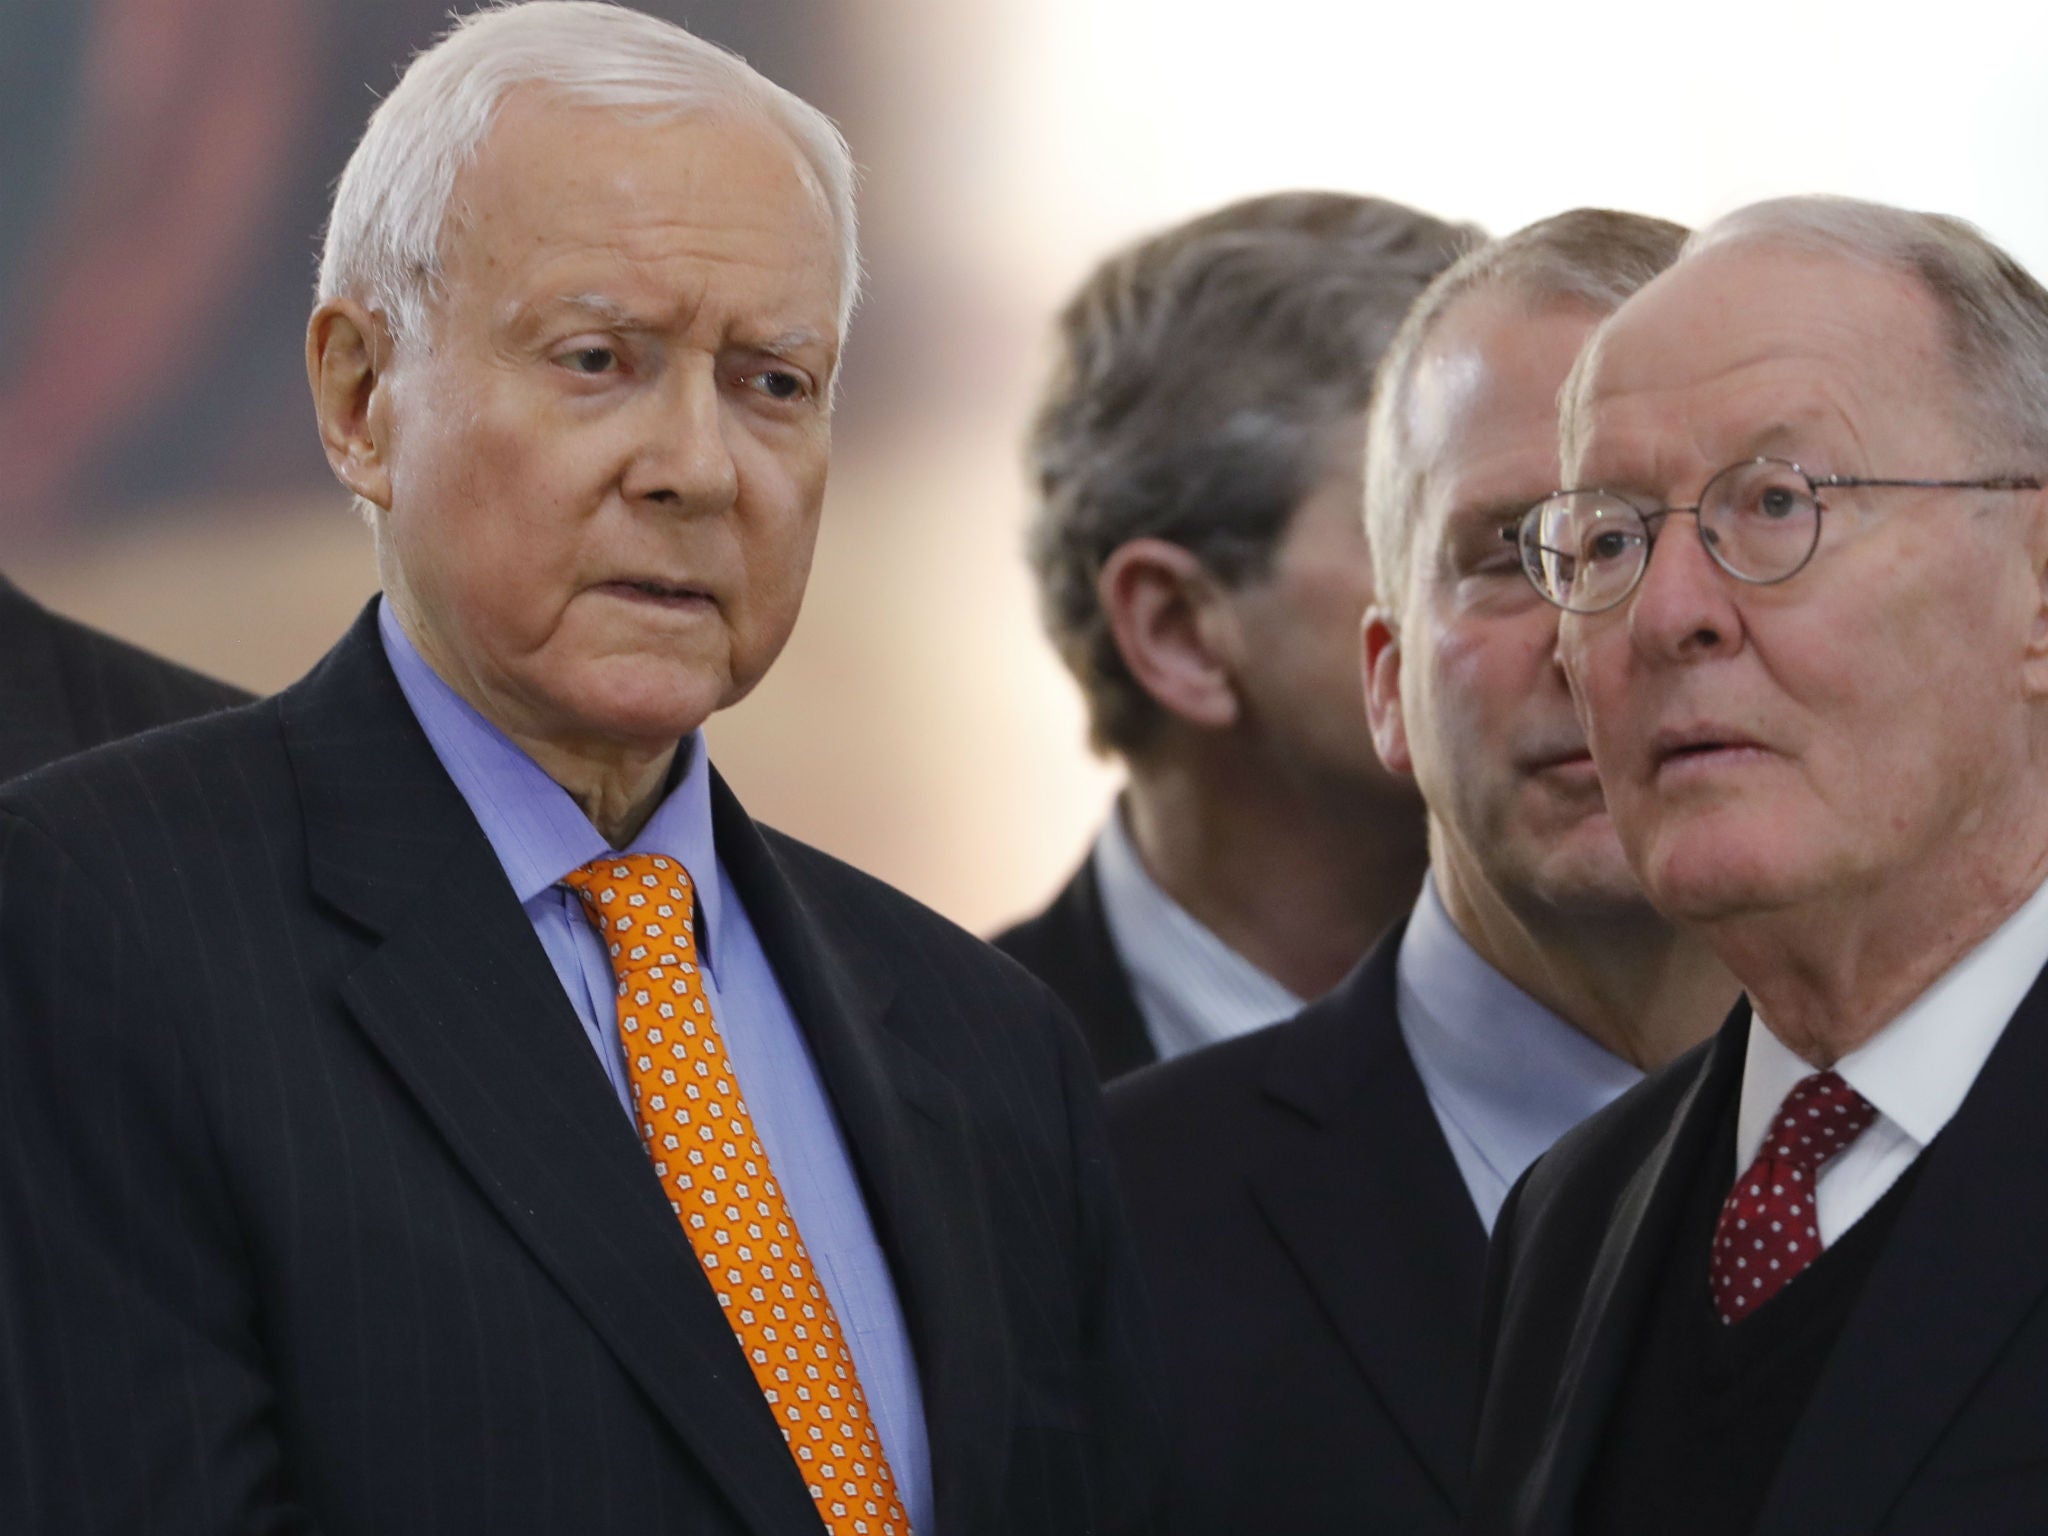 Senators Orrin Hatch and Lamar Alexander have both signed a letter urging Donald Trump to end his 'zero tolerance' policy towards illegal border crossings